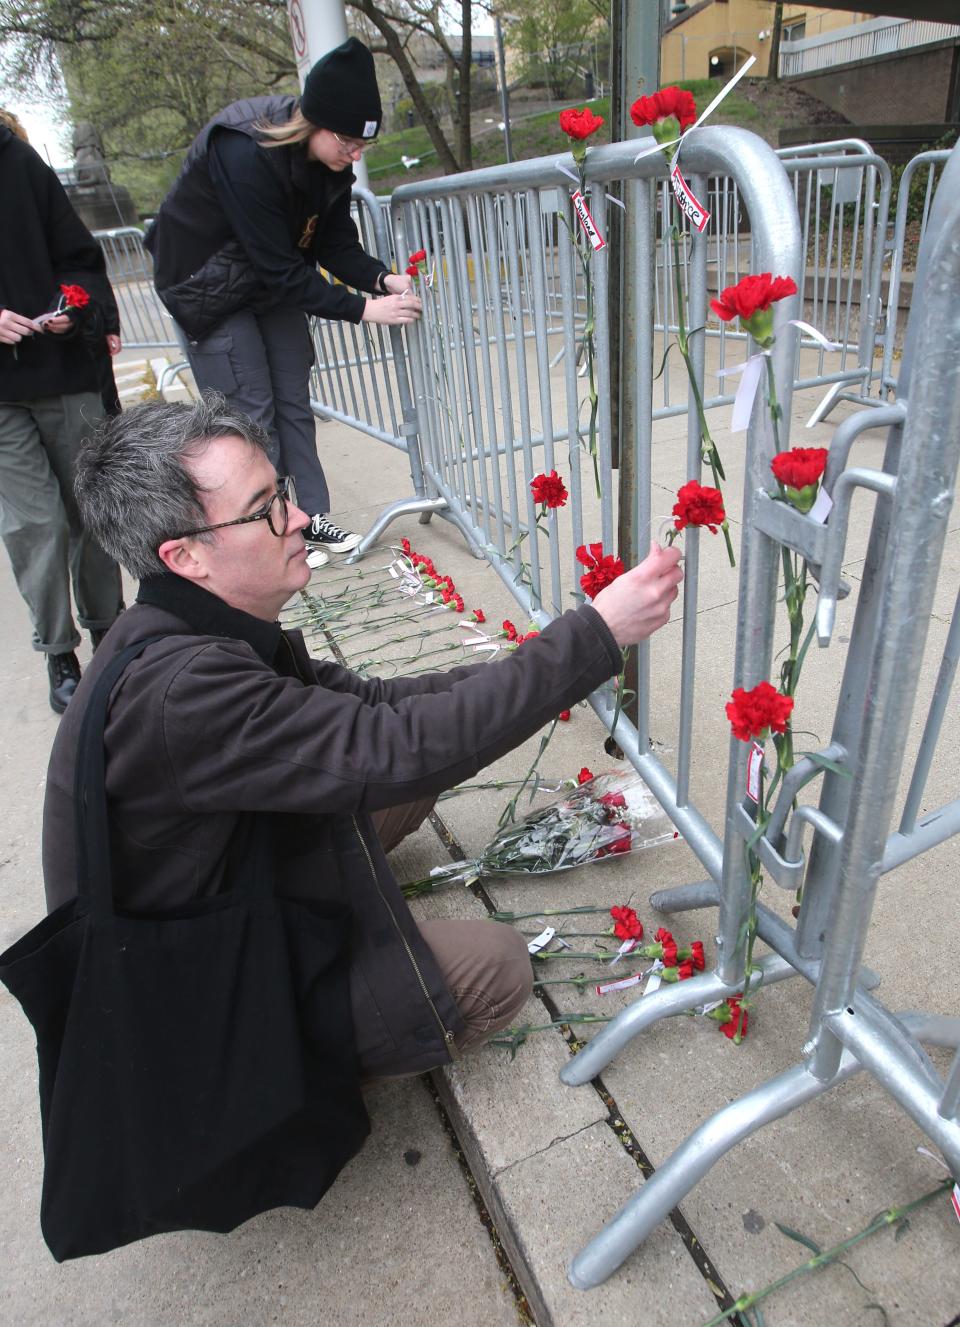 Jayland Walker protesters place red carnations on the security fence in front of the Stubbs Justice Center on Monday, April 24, 2023 in Akron.